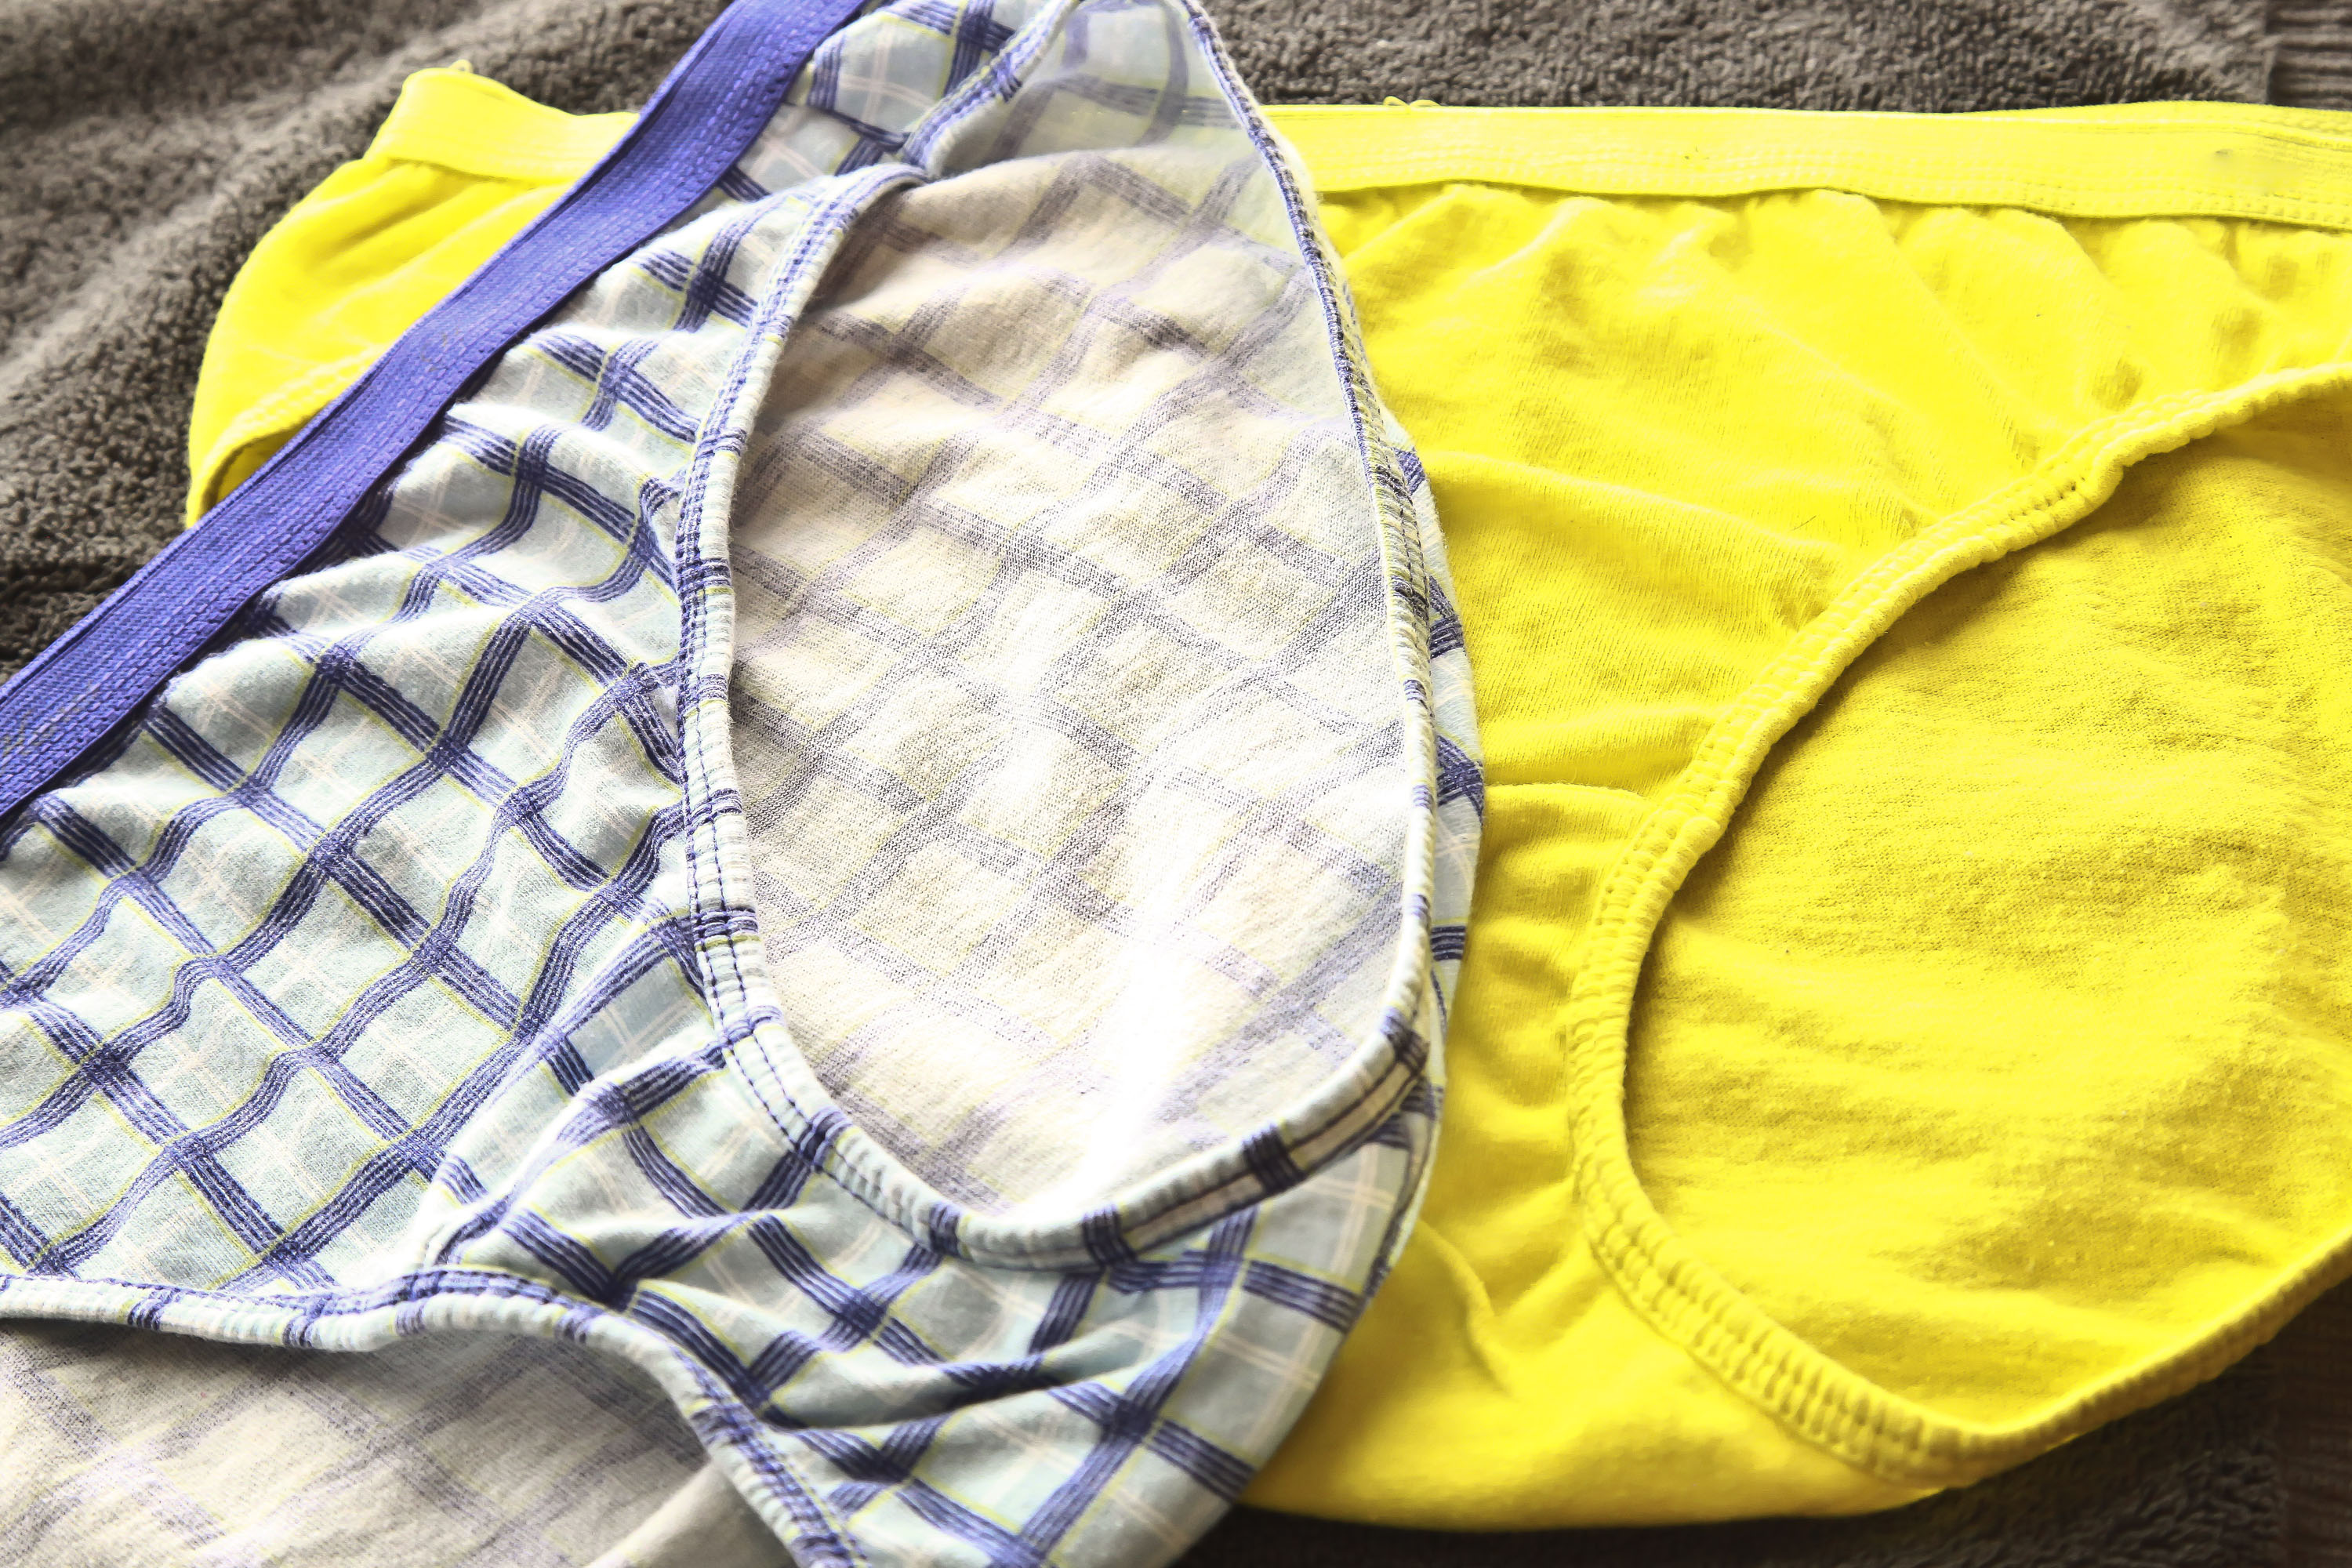 How to remove urine stains from underwear and other fabrics 